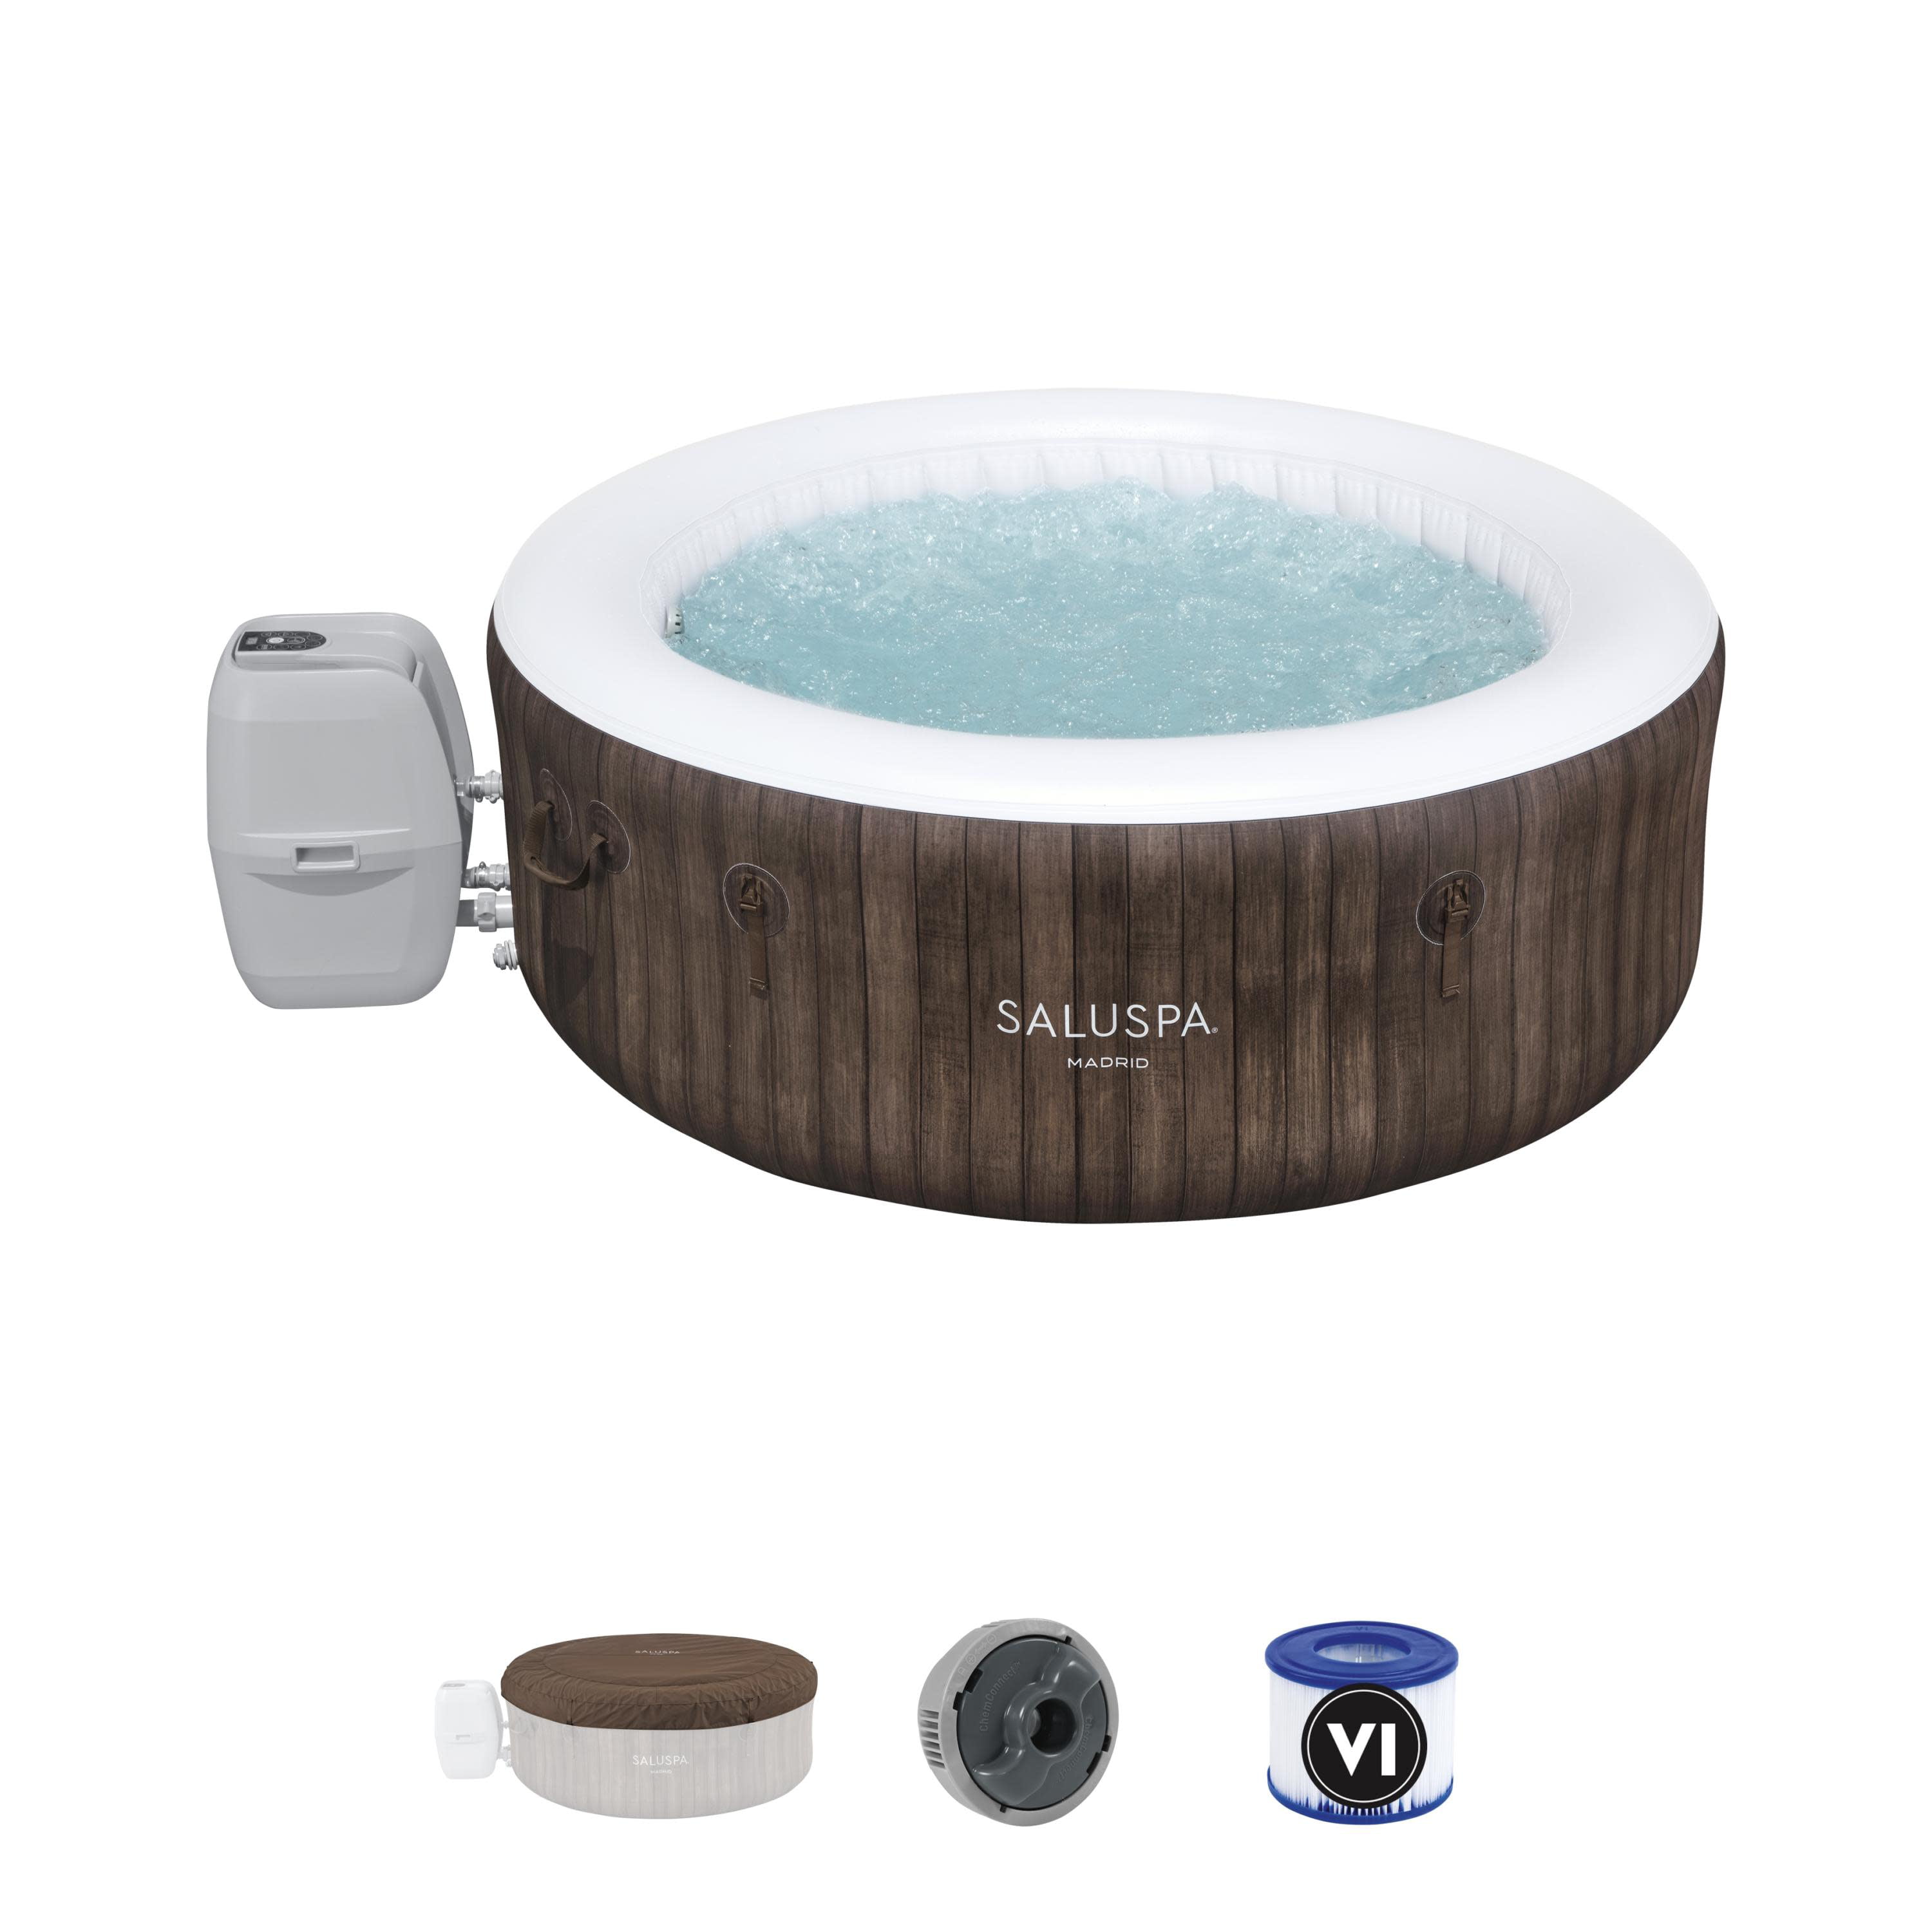 71" x 26" Bestway SaluSpa Madrid AirJet Inflatable Spa $298 + Free Shipping